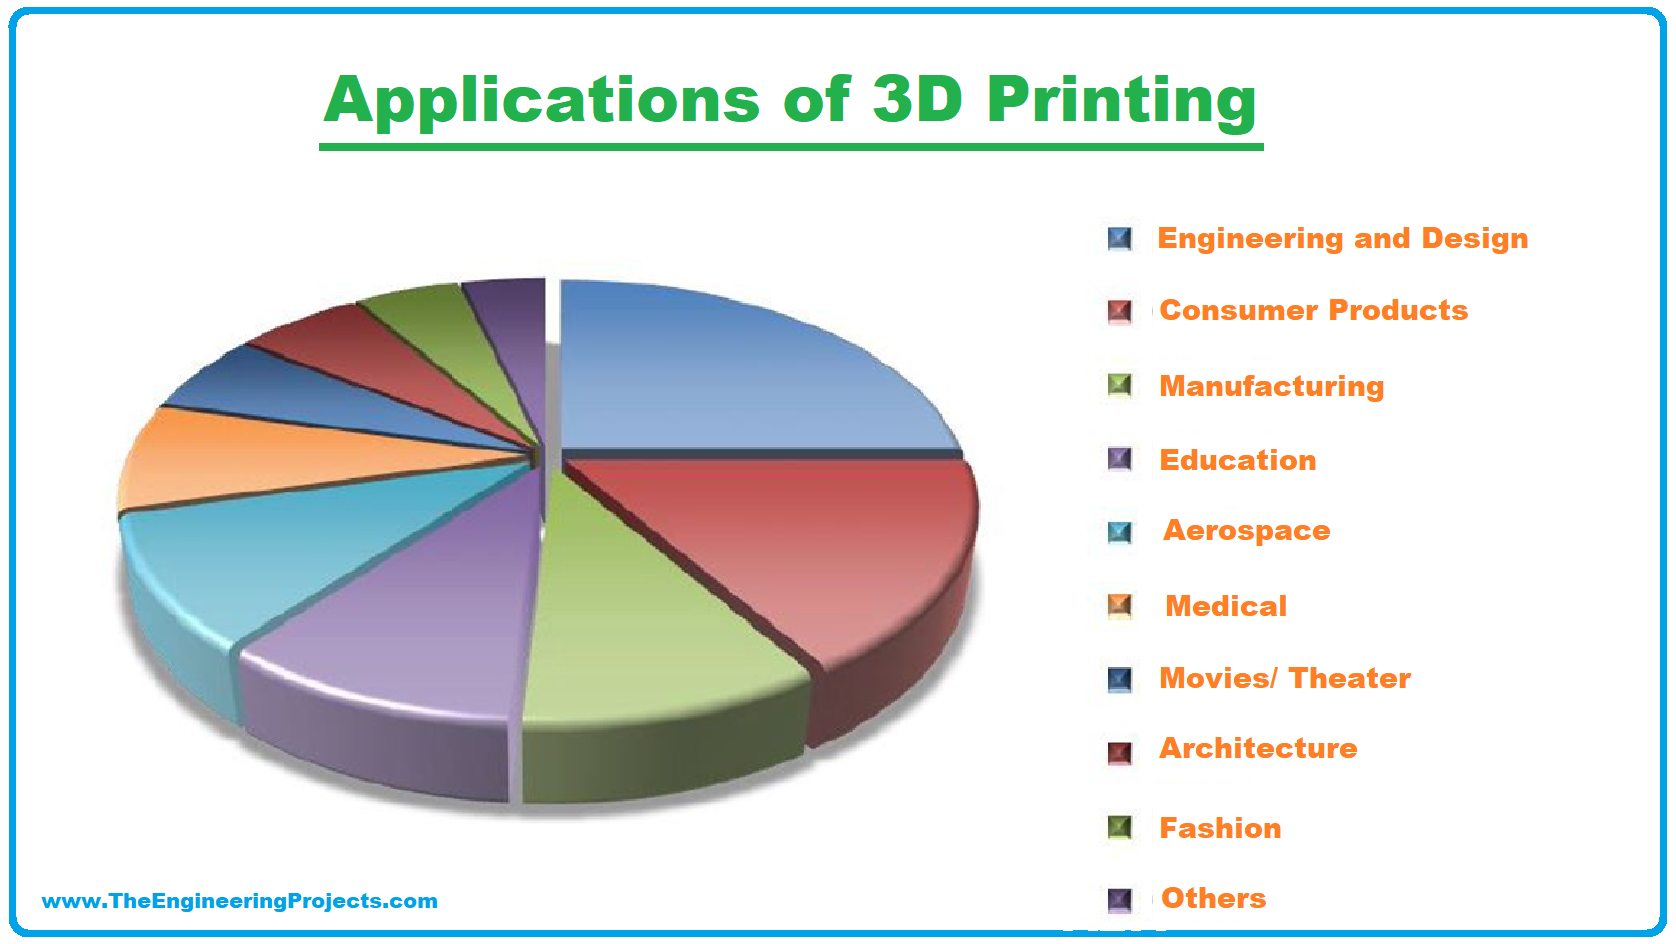 What are the business applications of 3D Printing, practical applications of 3D printers